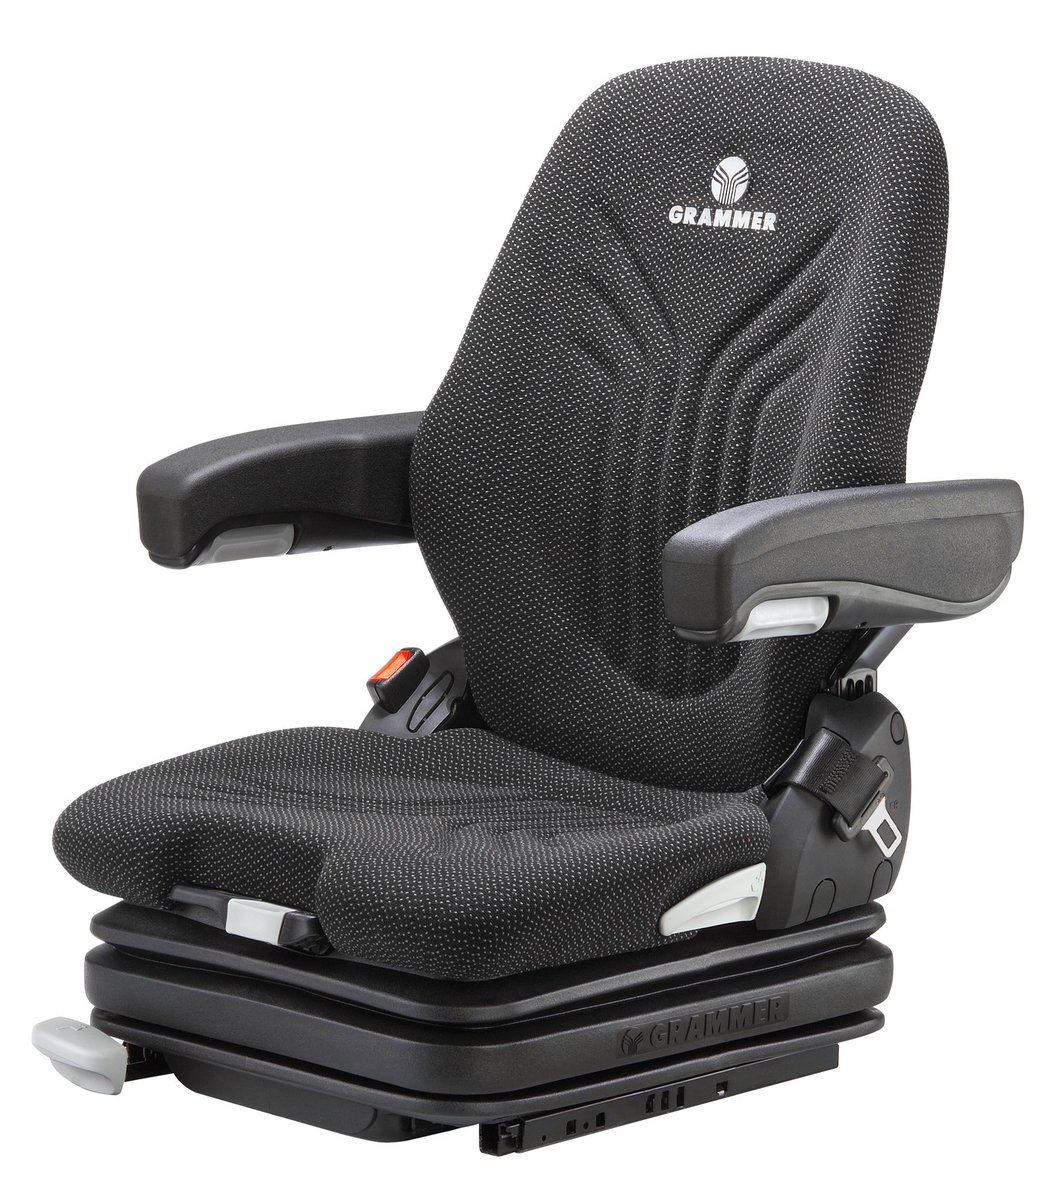 Thomas Scott Seating Twitterren Forklift Linde Toyota Cat Seats To Suit All Forklifts And Replacement Cushions Sears Grammer Kabseating Https T Co Yipzwz95nc